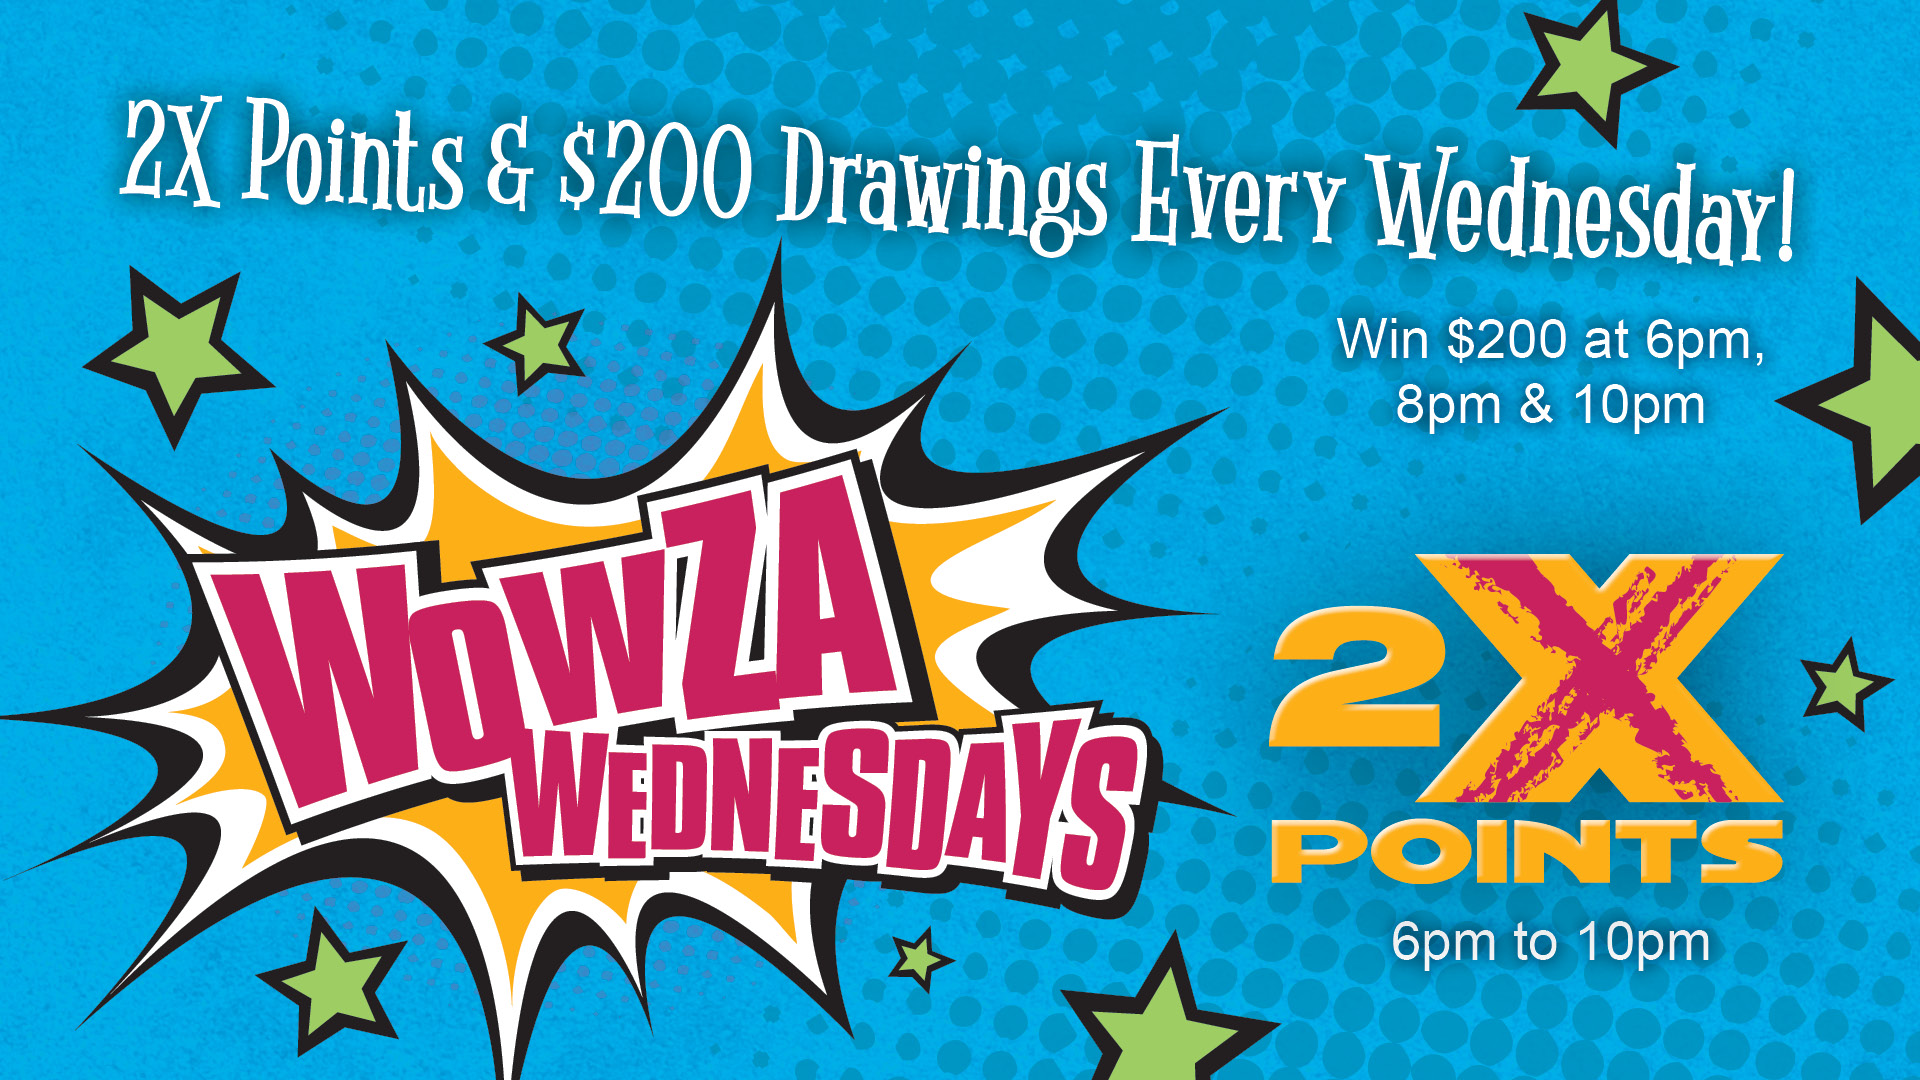 Wowza Wednesdays: 2X Points & $200 Drawings Every Wednesday! Win $200 at 6pm, 8pm & 10pm.